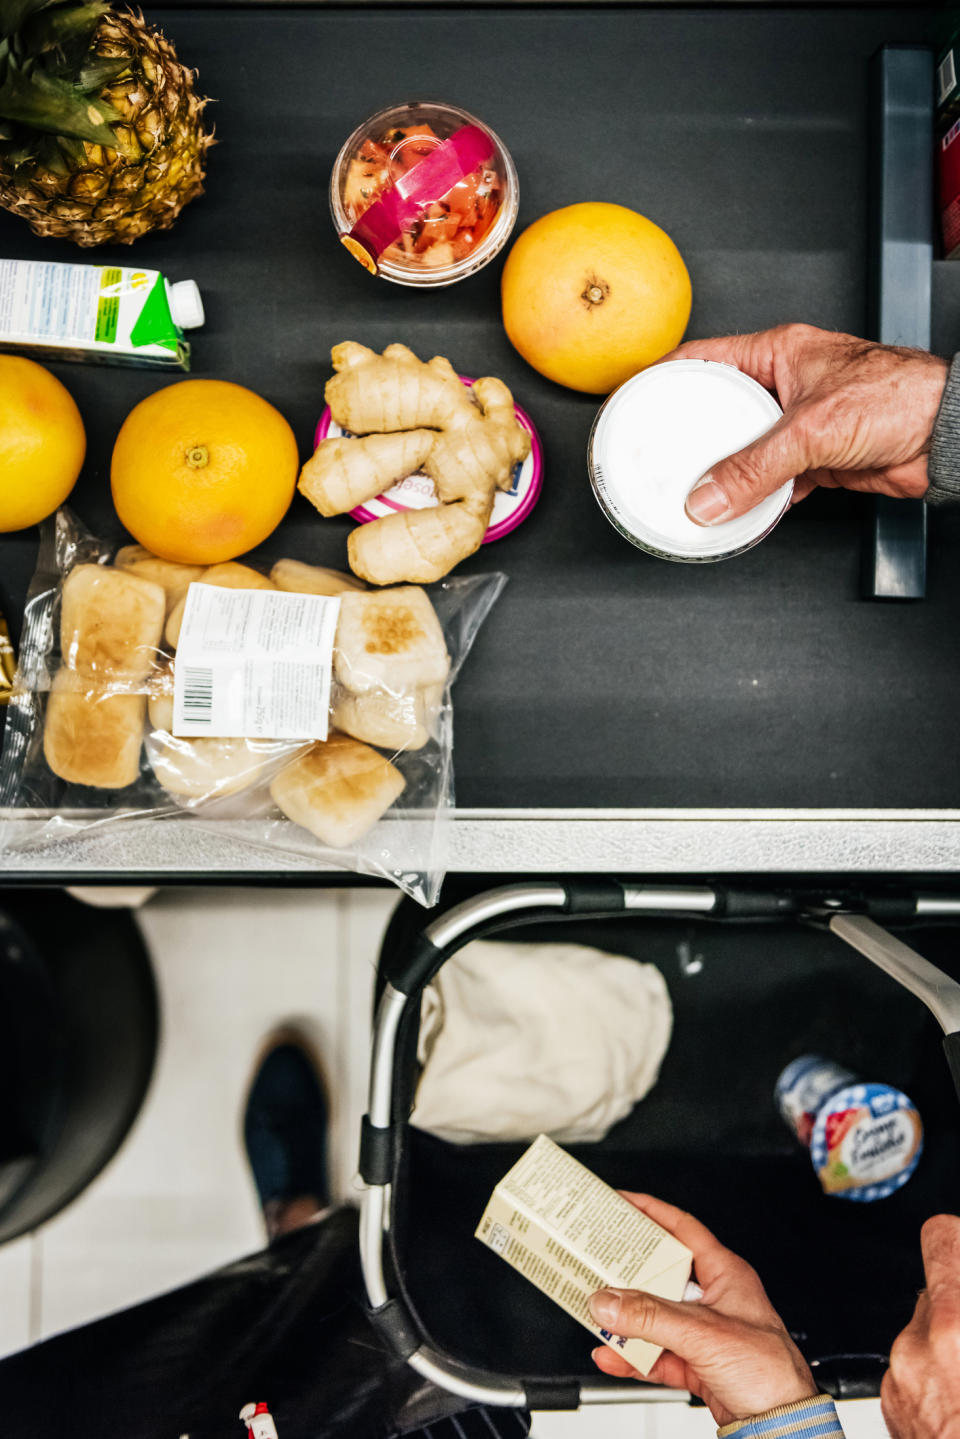 Person unpacking groceries including fruit, yogurt, and ginger onto a kitchen counter